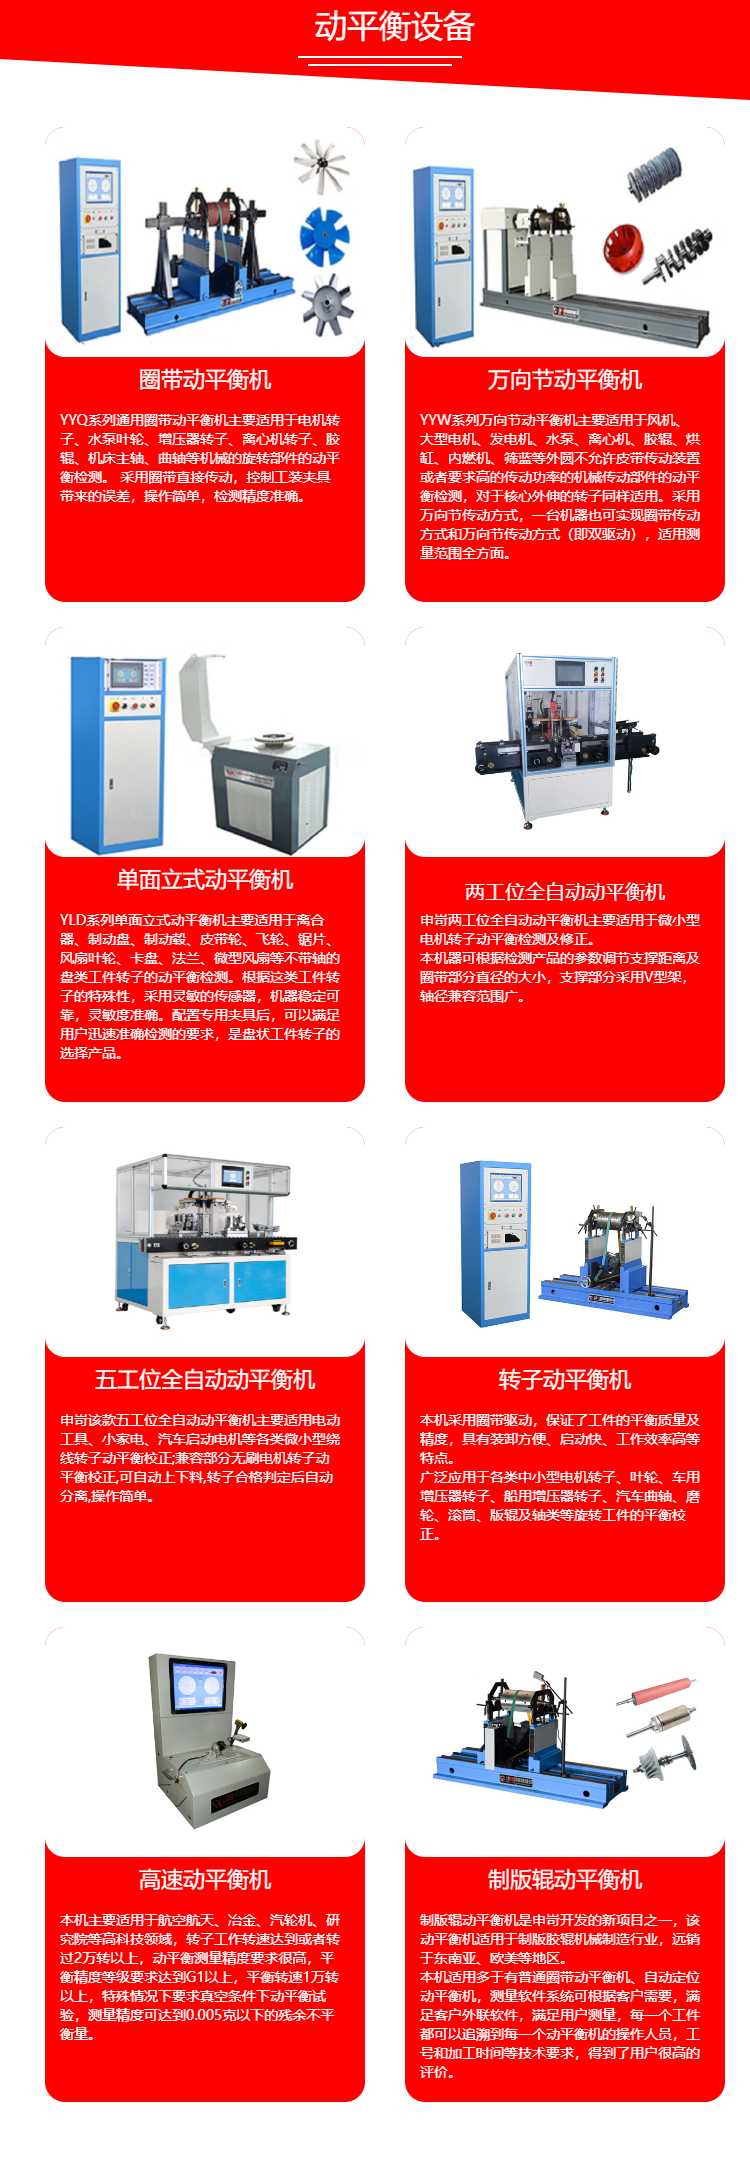 Renovation of old dynamic balancing equipment for dynamic balancing machine, upgrading and maintenance of Shenke dynamic balancing equipment